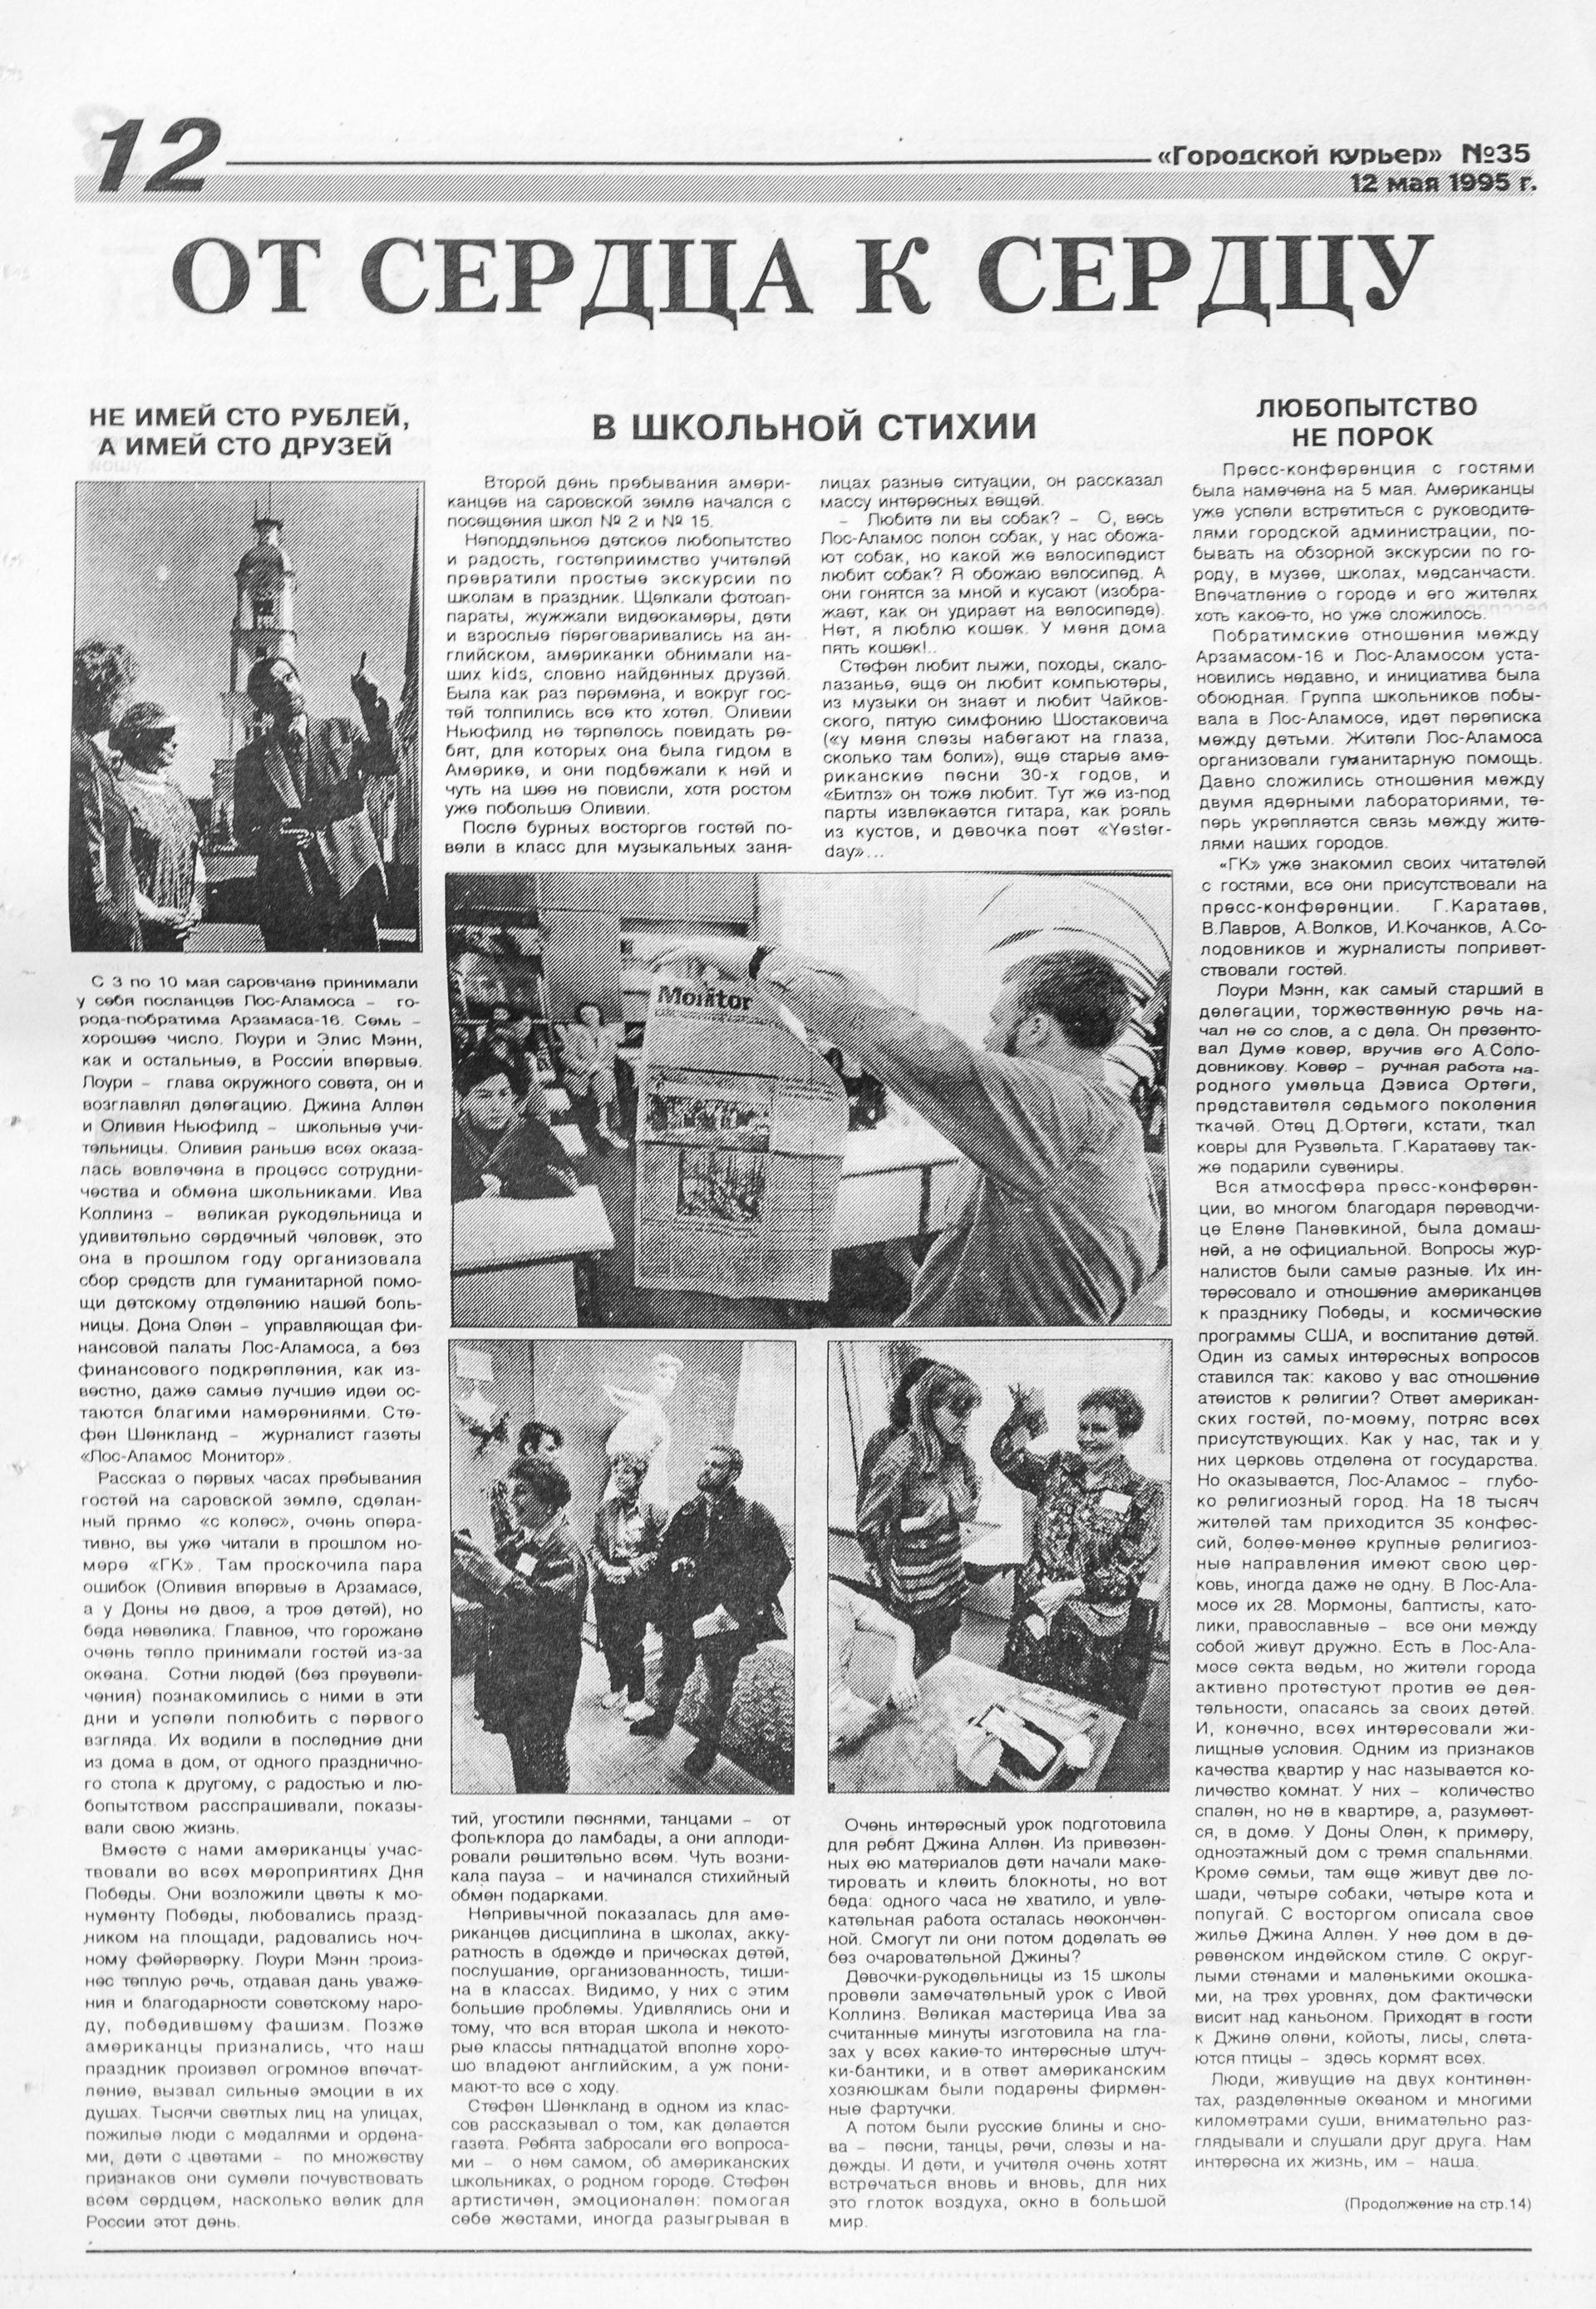 Sarov's City Courier newspaper from 1995 chronicles the visit of Stephen Shankland (center photo, holding newspaper) and others from Los Alamos, New Mexico, to the Russian nuclear weapons design city.